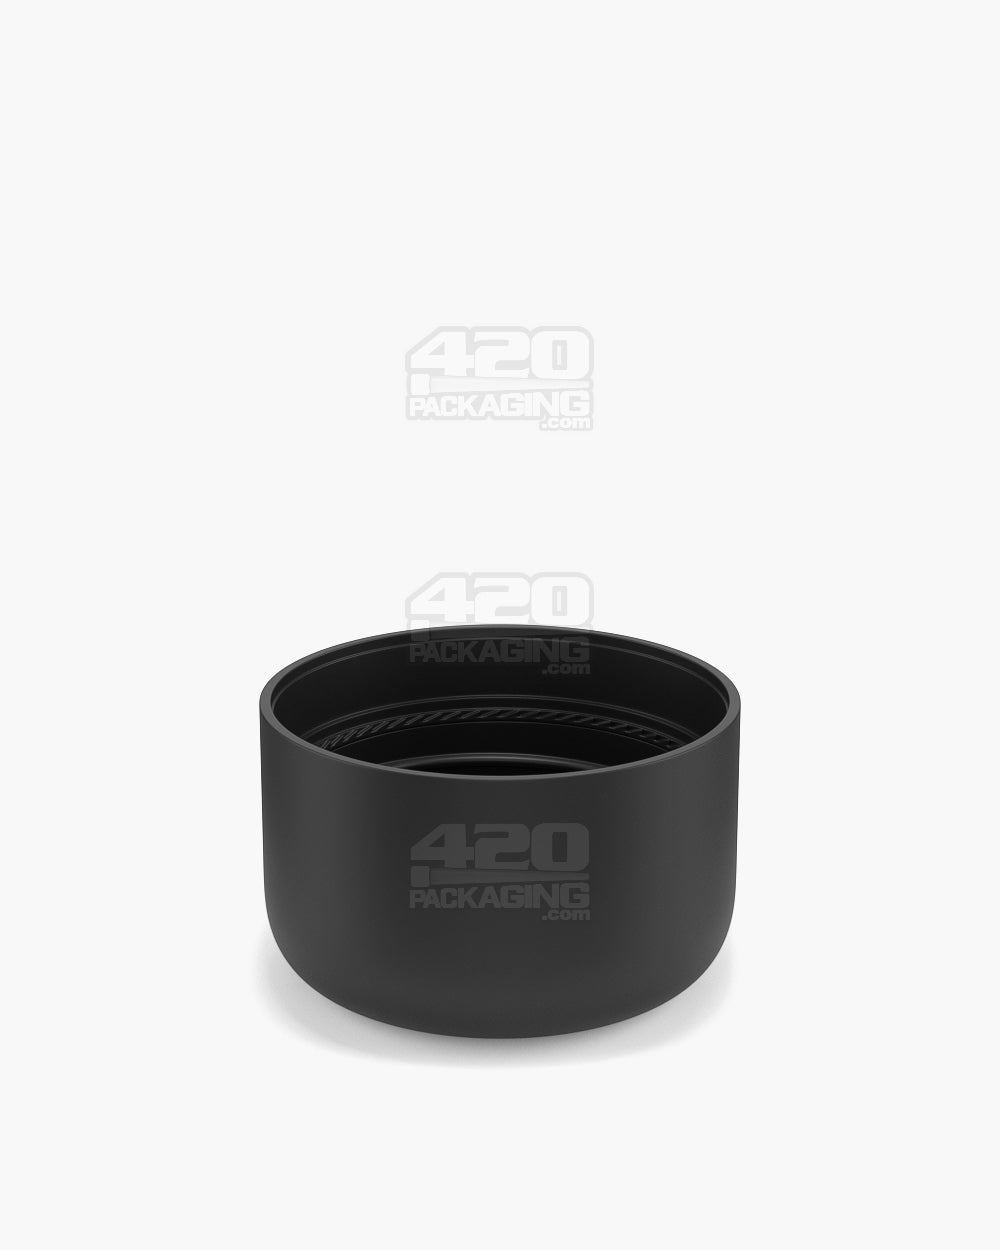 52mm Pollen Gear HiLine Smooth Push and Turn Child Resistant Plastic Dome Round Caps w/ 3-Layer Liner - Matte Black - 72/Box